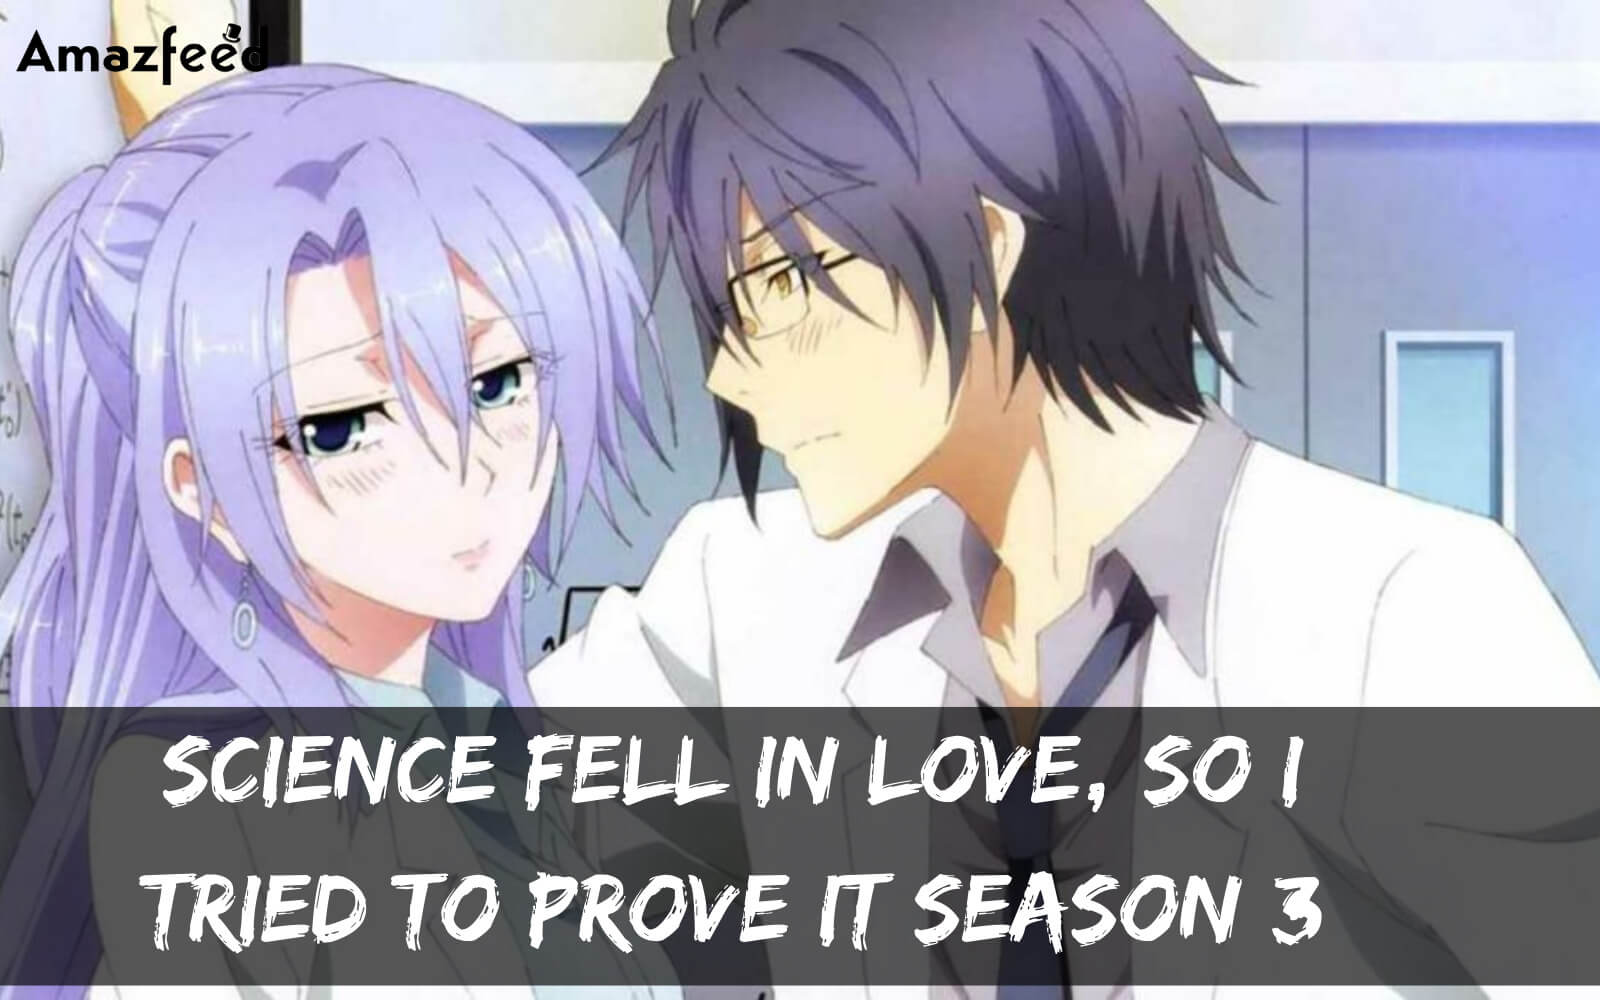 Science Fell in Love, So I Tried to Prove It Season 3 predictions